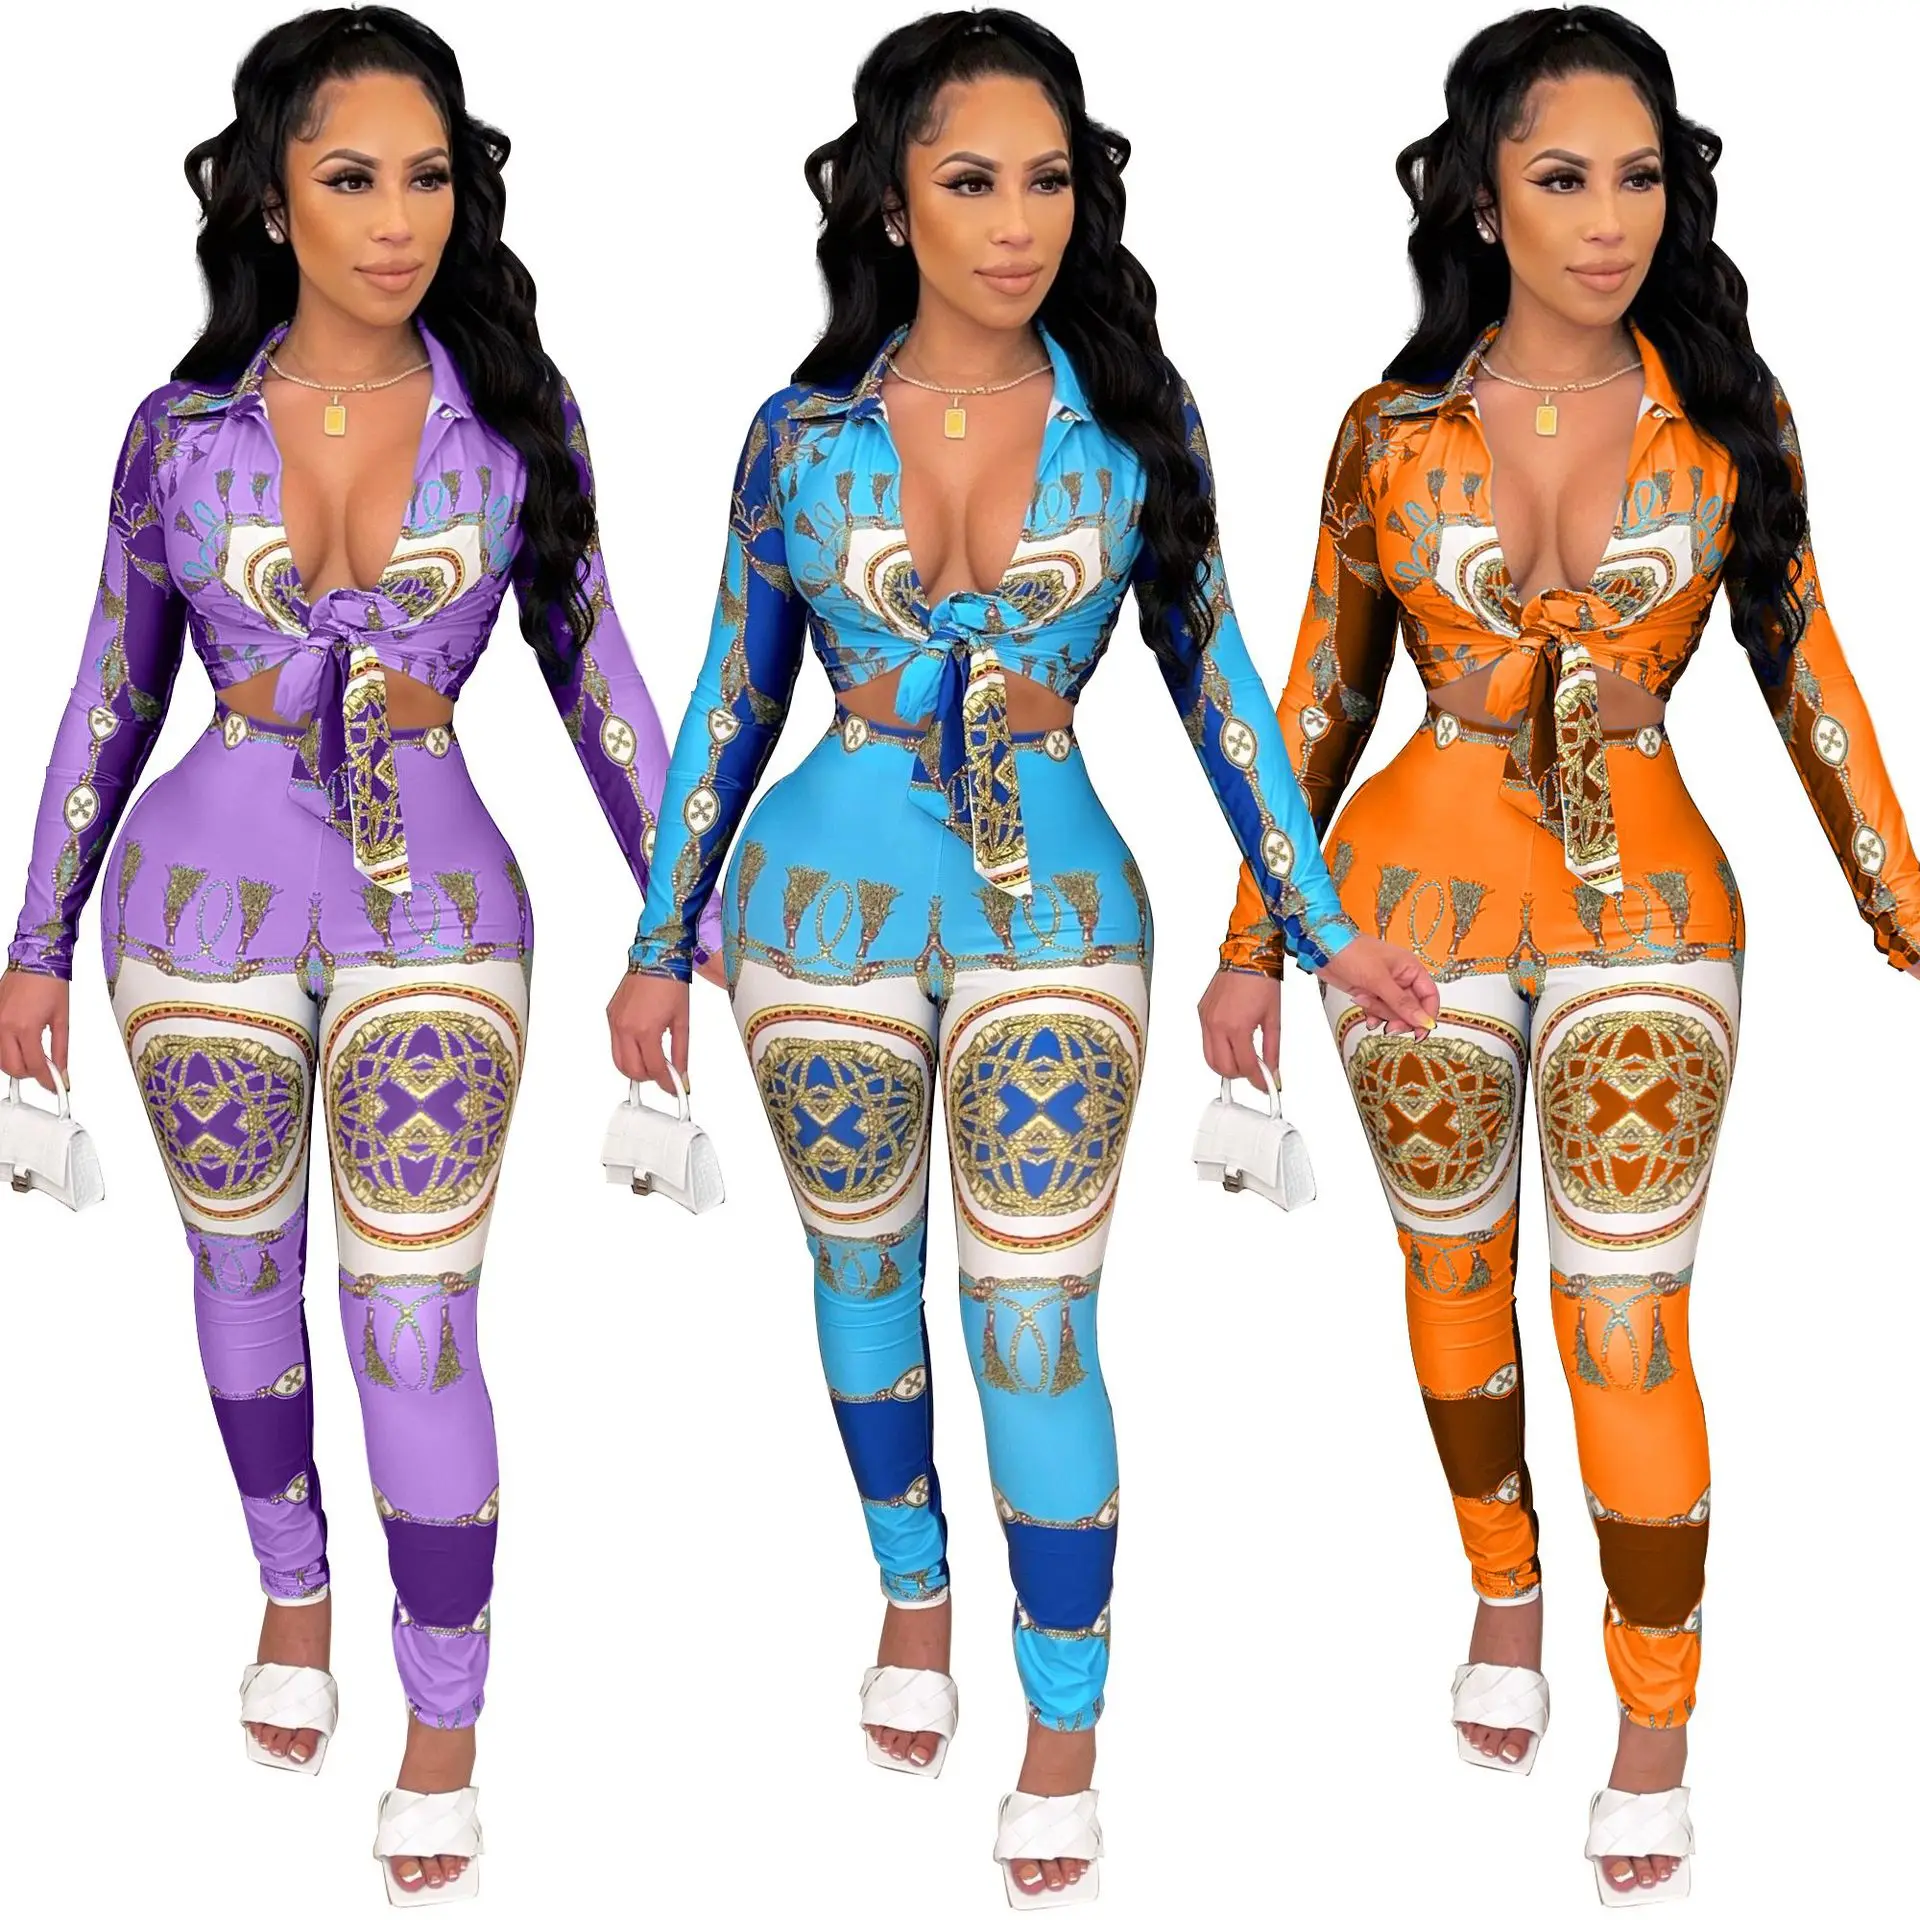 

Dropship Ladies Street Club Wear Sexy Crop Legging Set wholesale tracksuit clothing women s sexy outfit women two piece set, Pink blue purple women two piece outfits